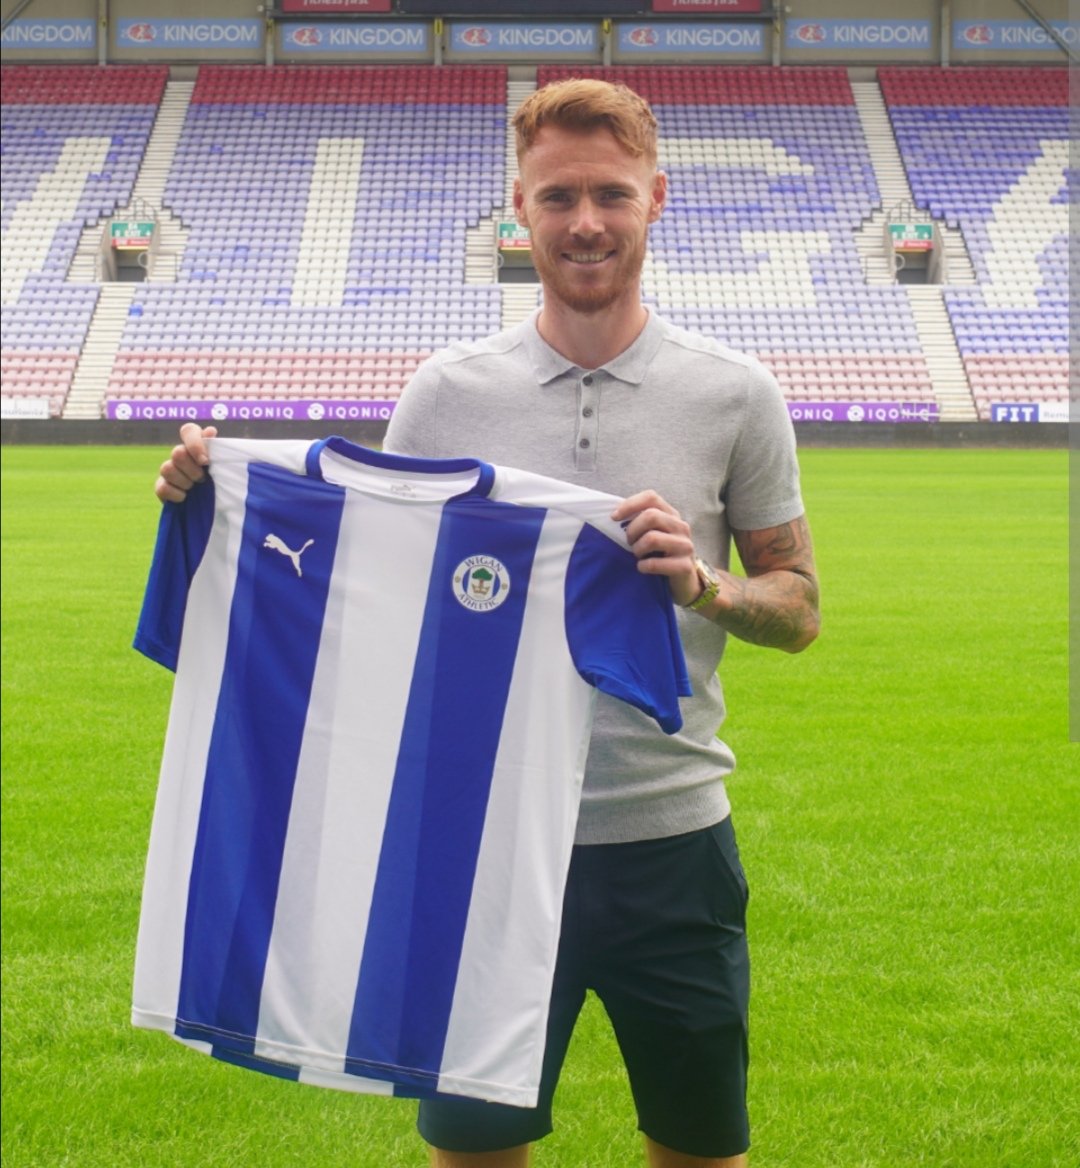 Chesterfield are set to complete the signing of Tom Naylor from Wigan #Spireites